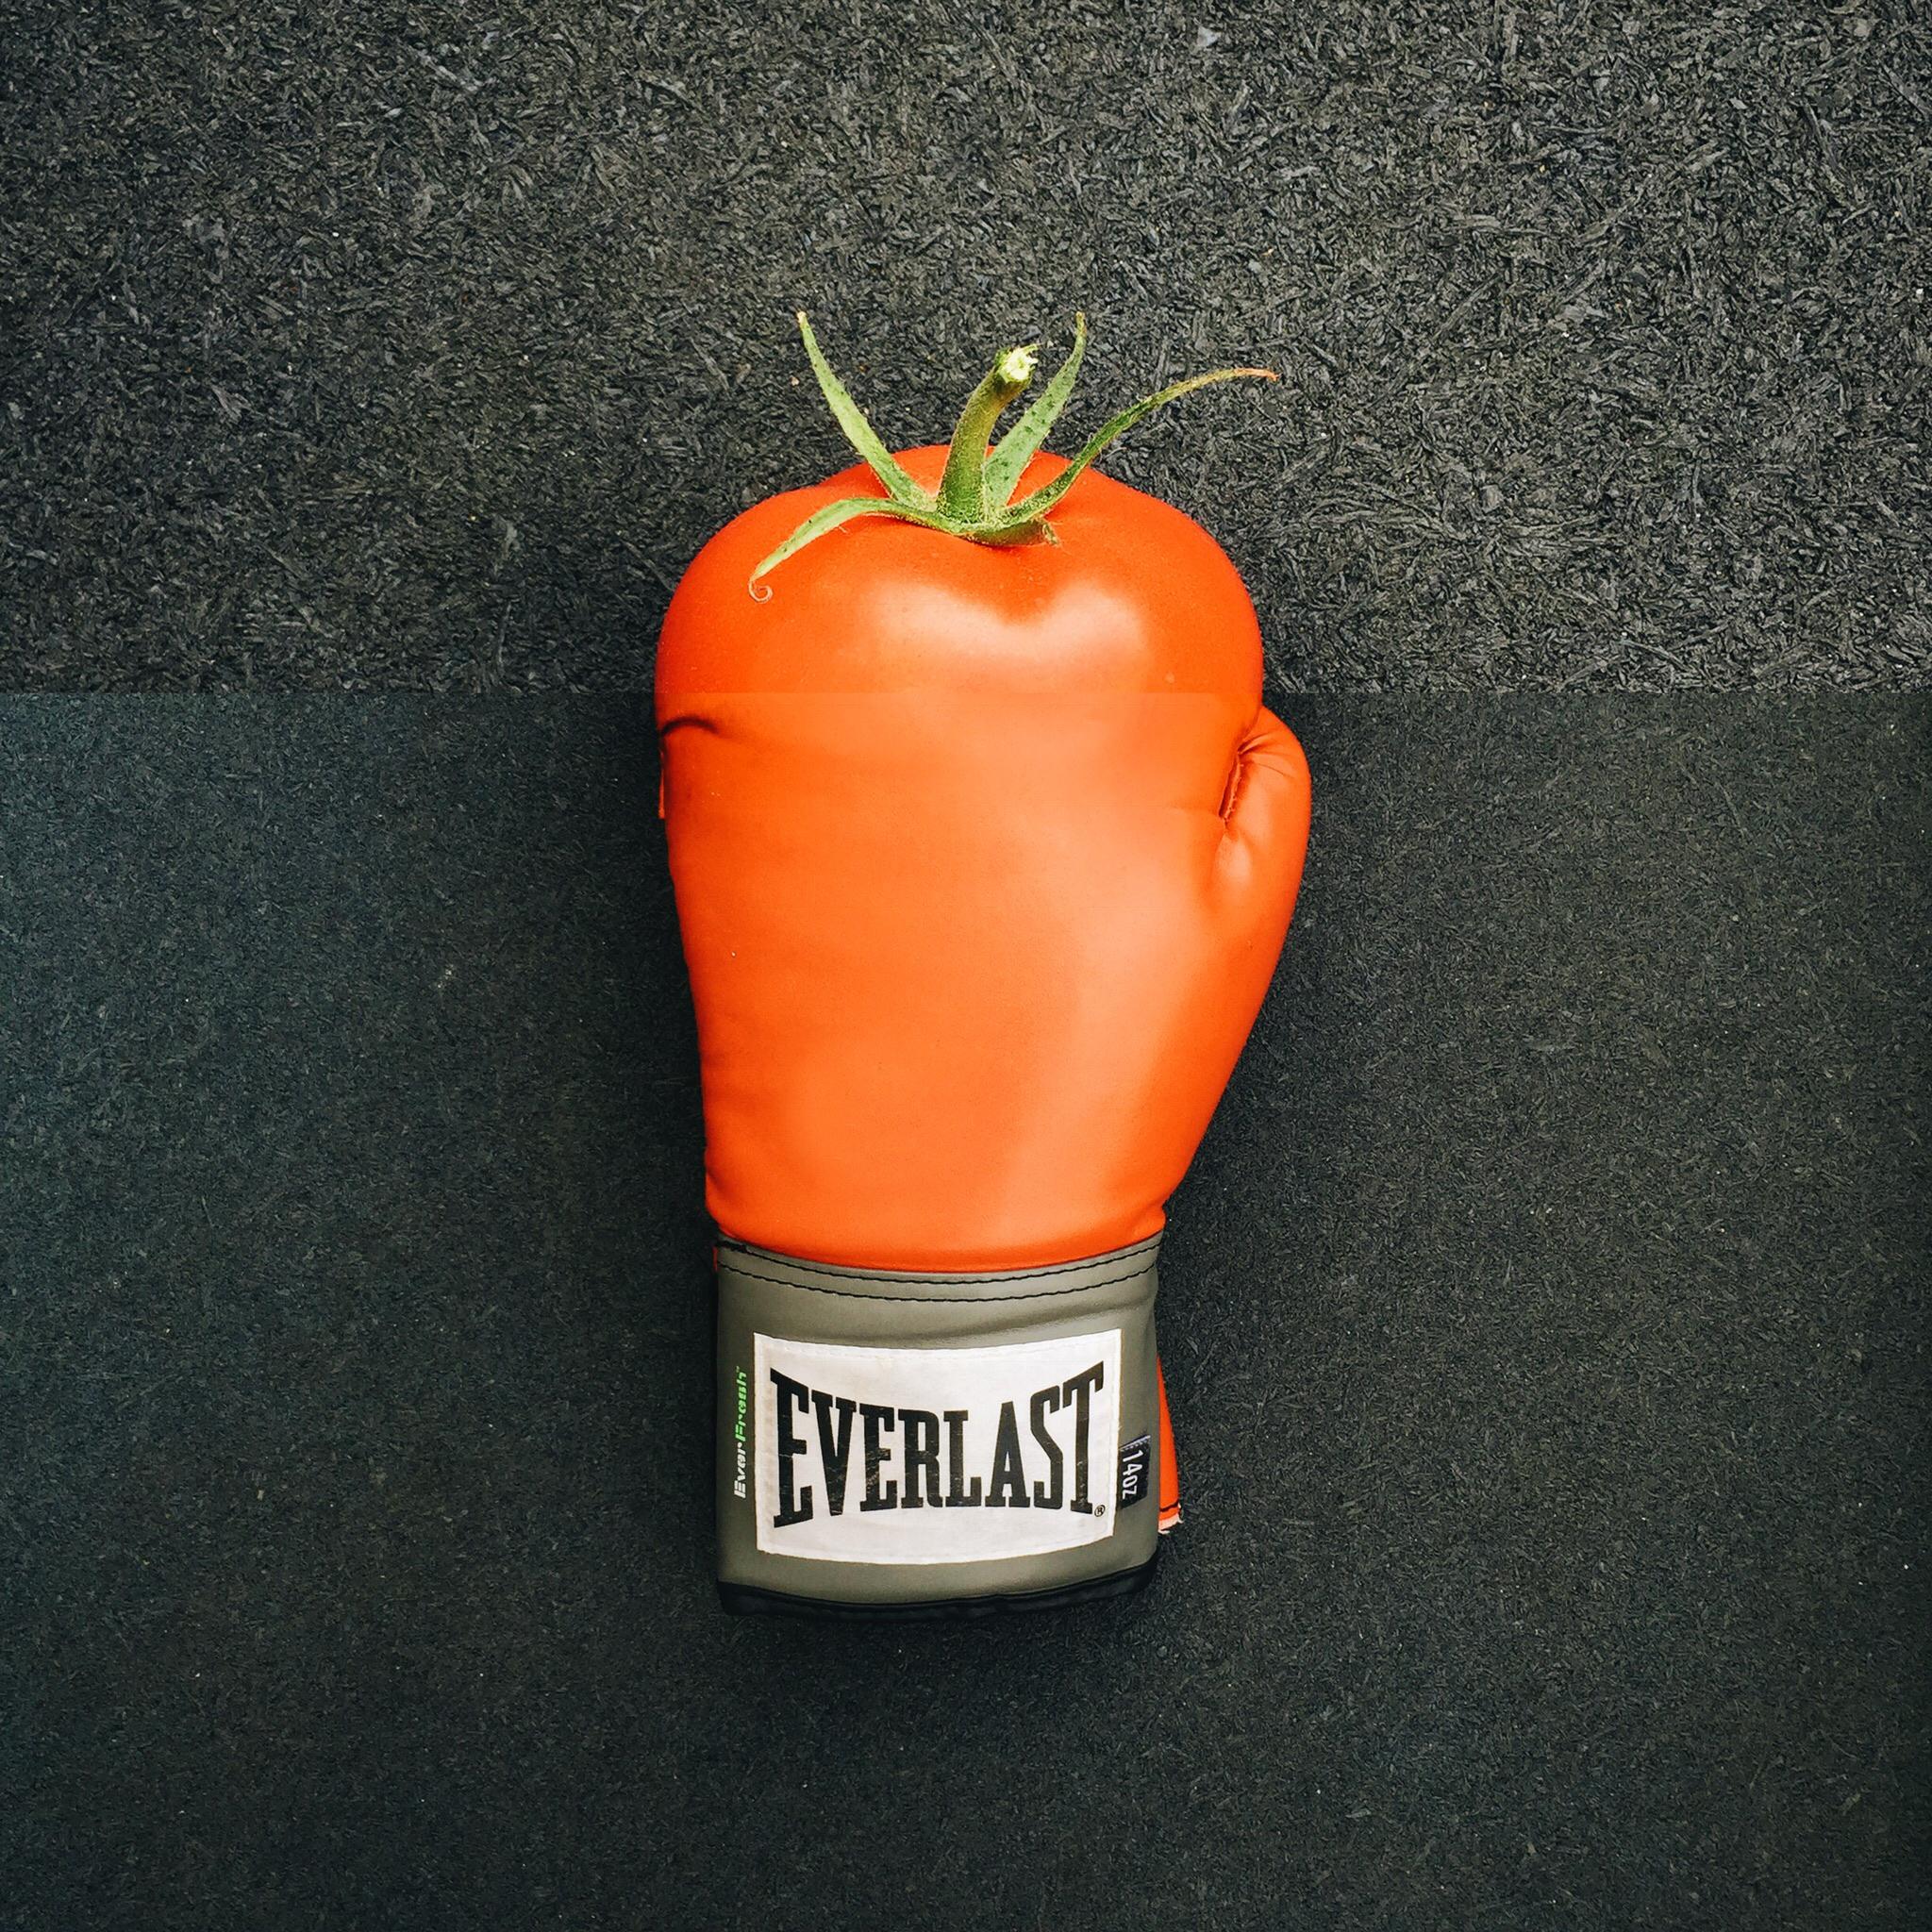 The top of a tomato sprouting from a boxing glove